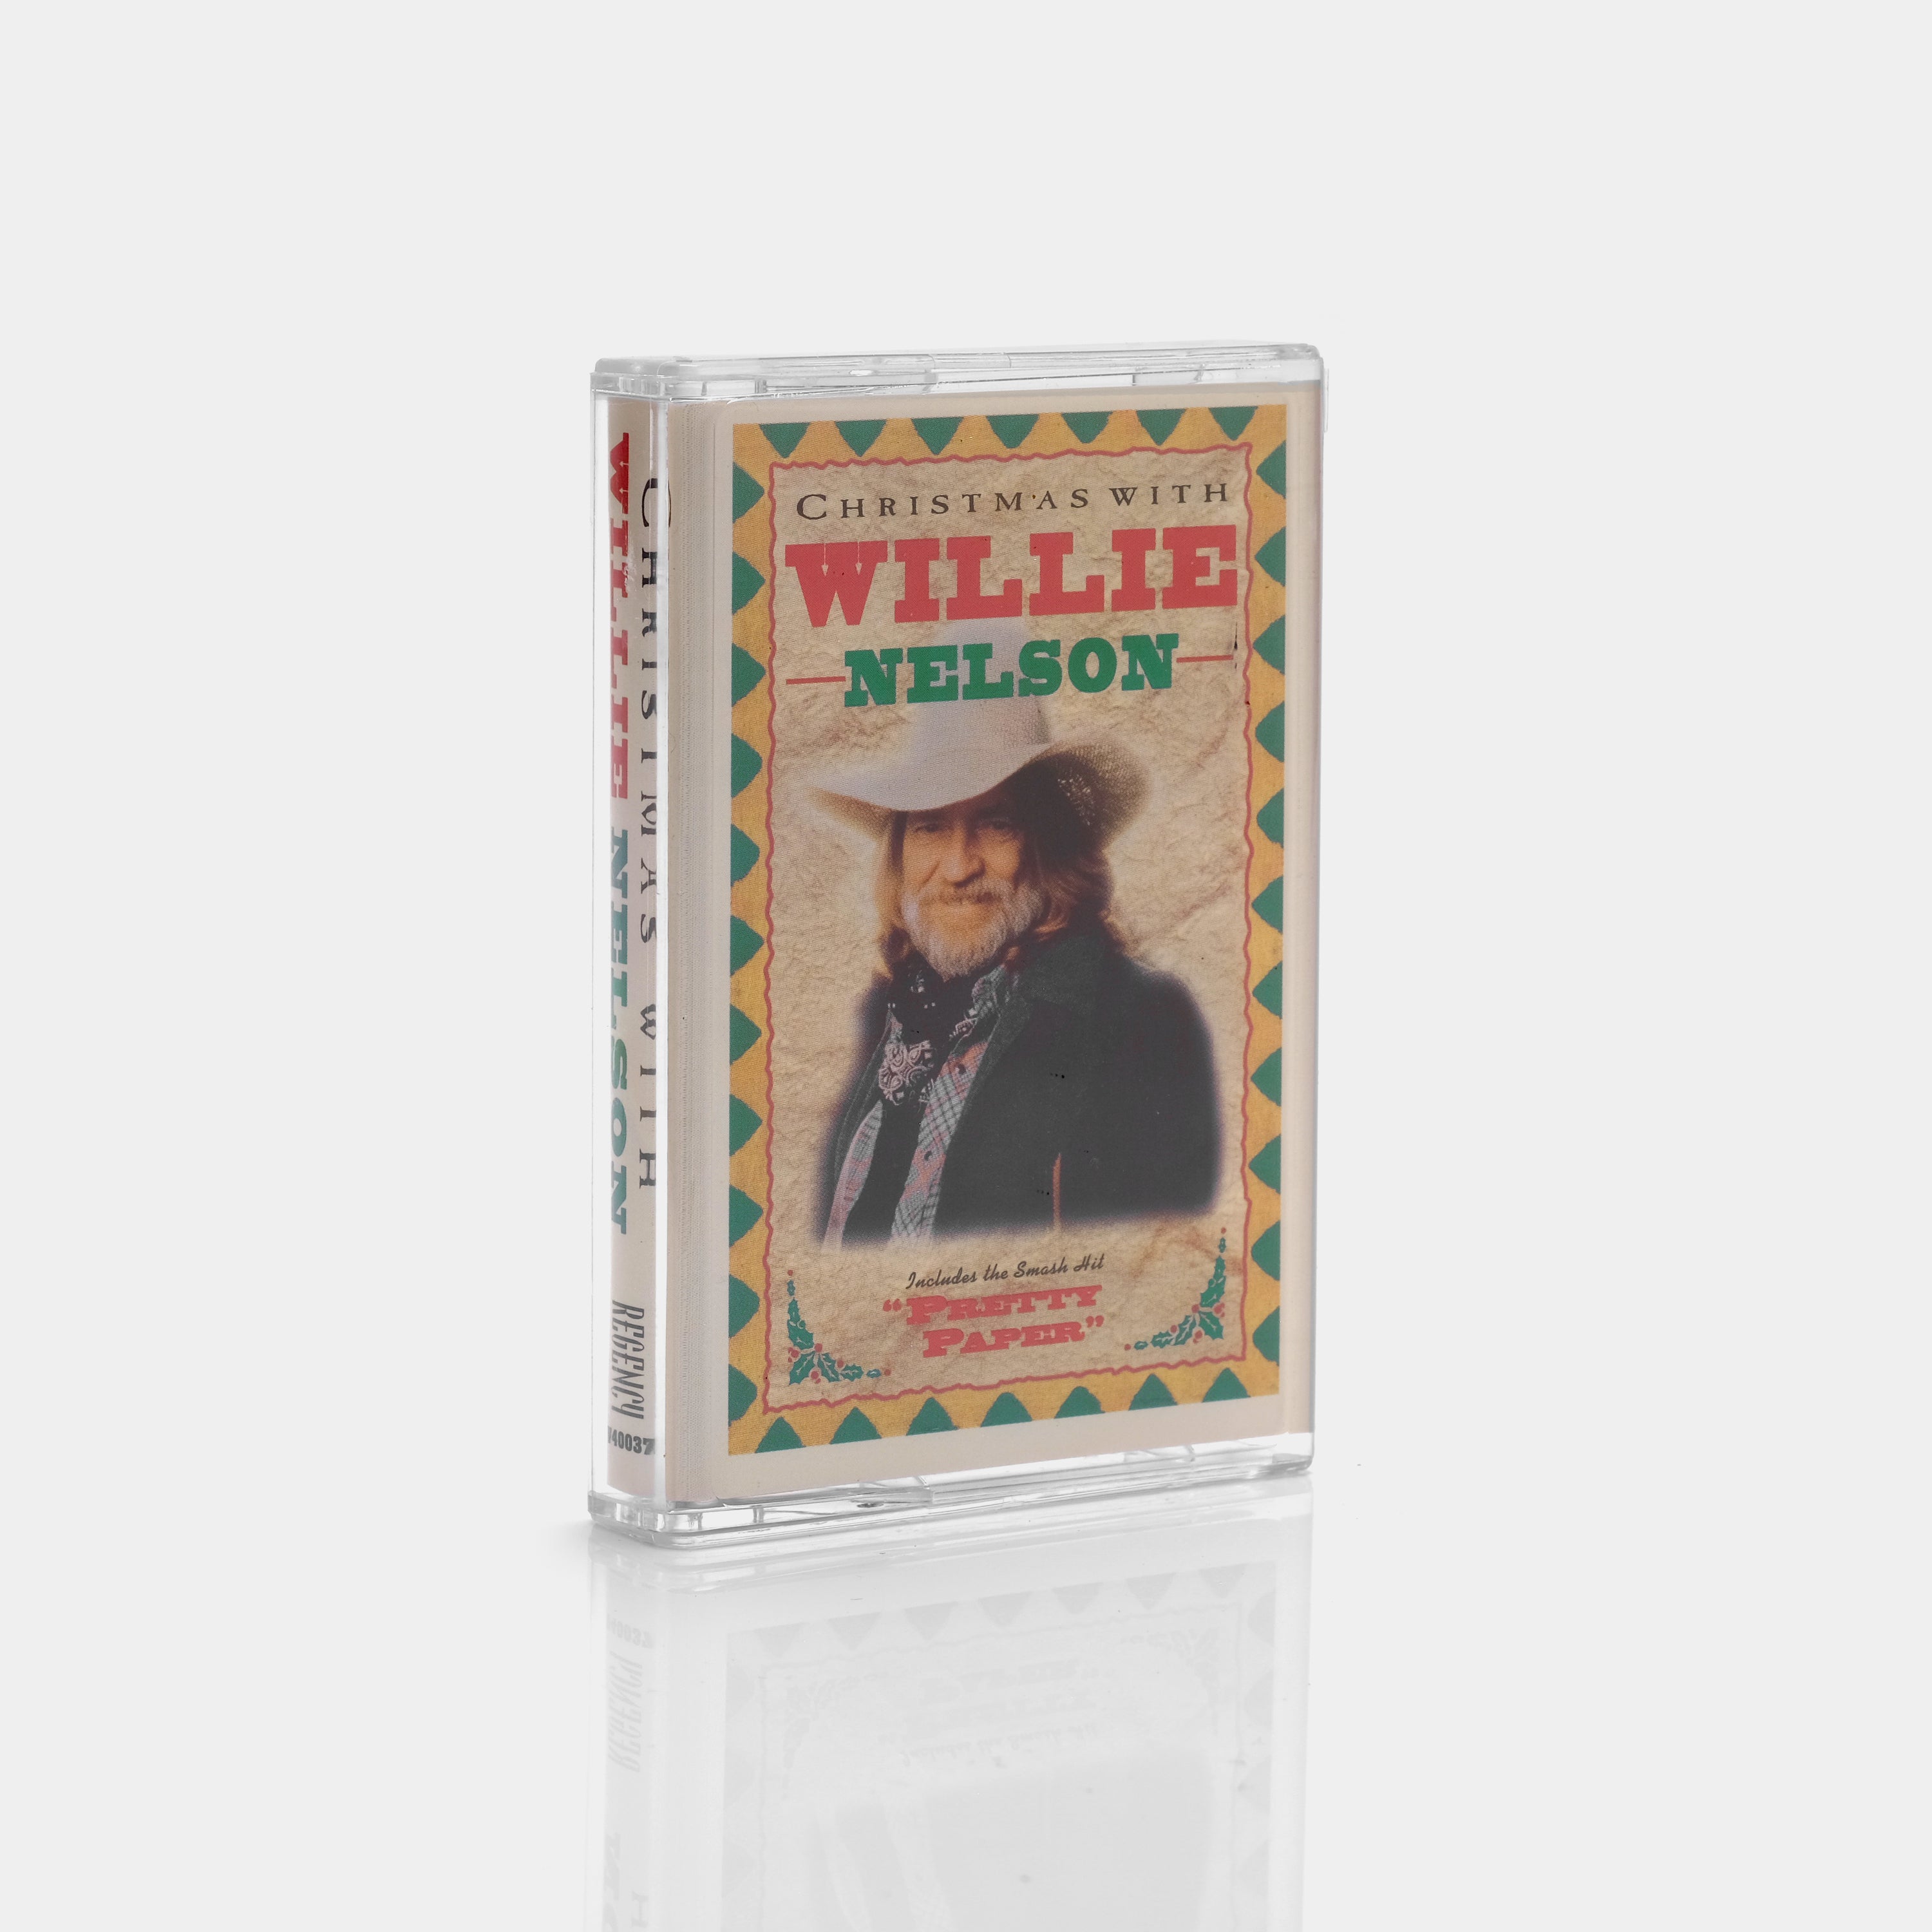 Willie Nelson - Christmas With Willie Nelson Cassette Tape